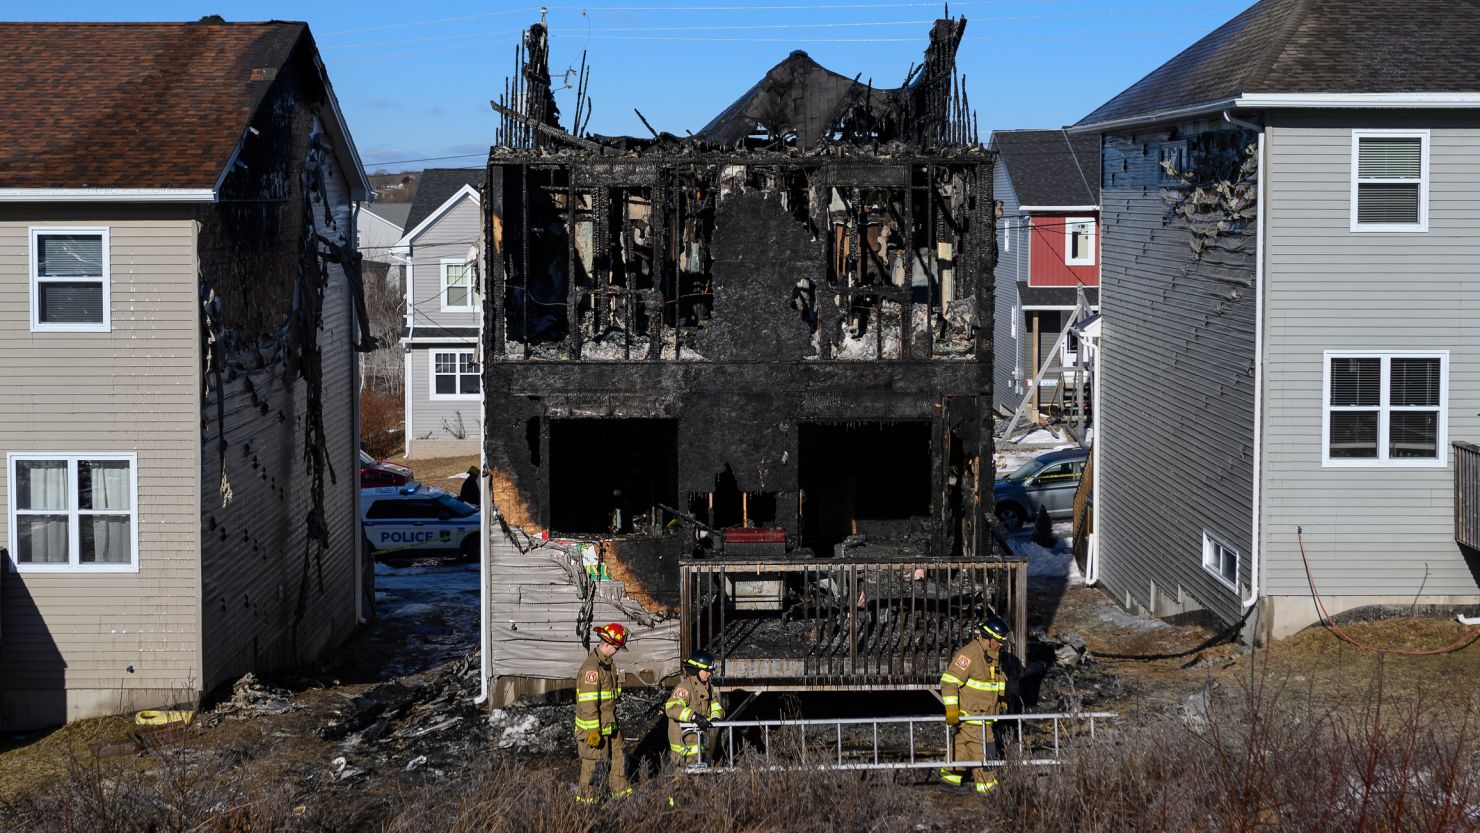 All seven of the Barho children died in a fire at this home in Halifax.